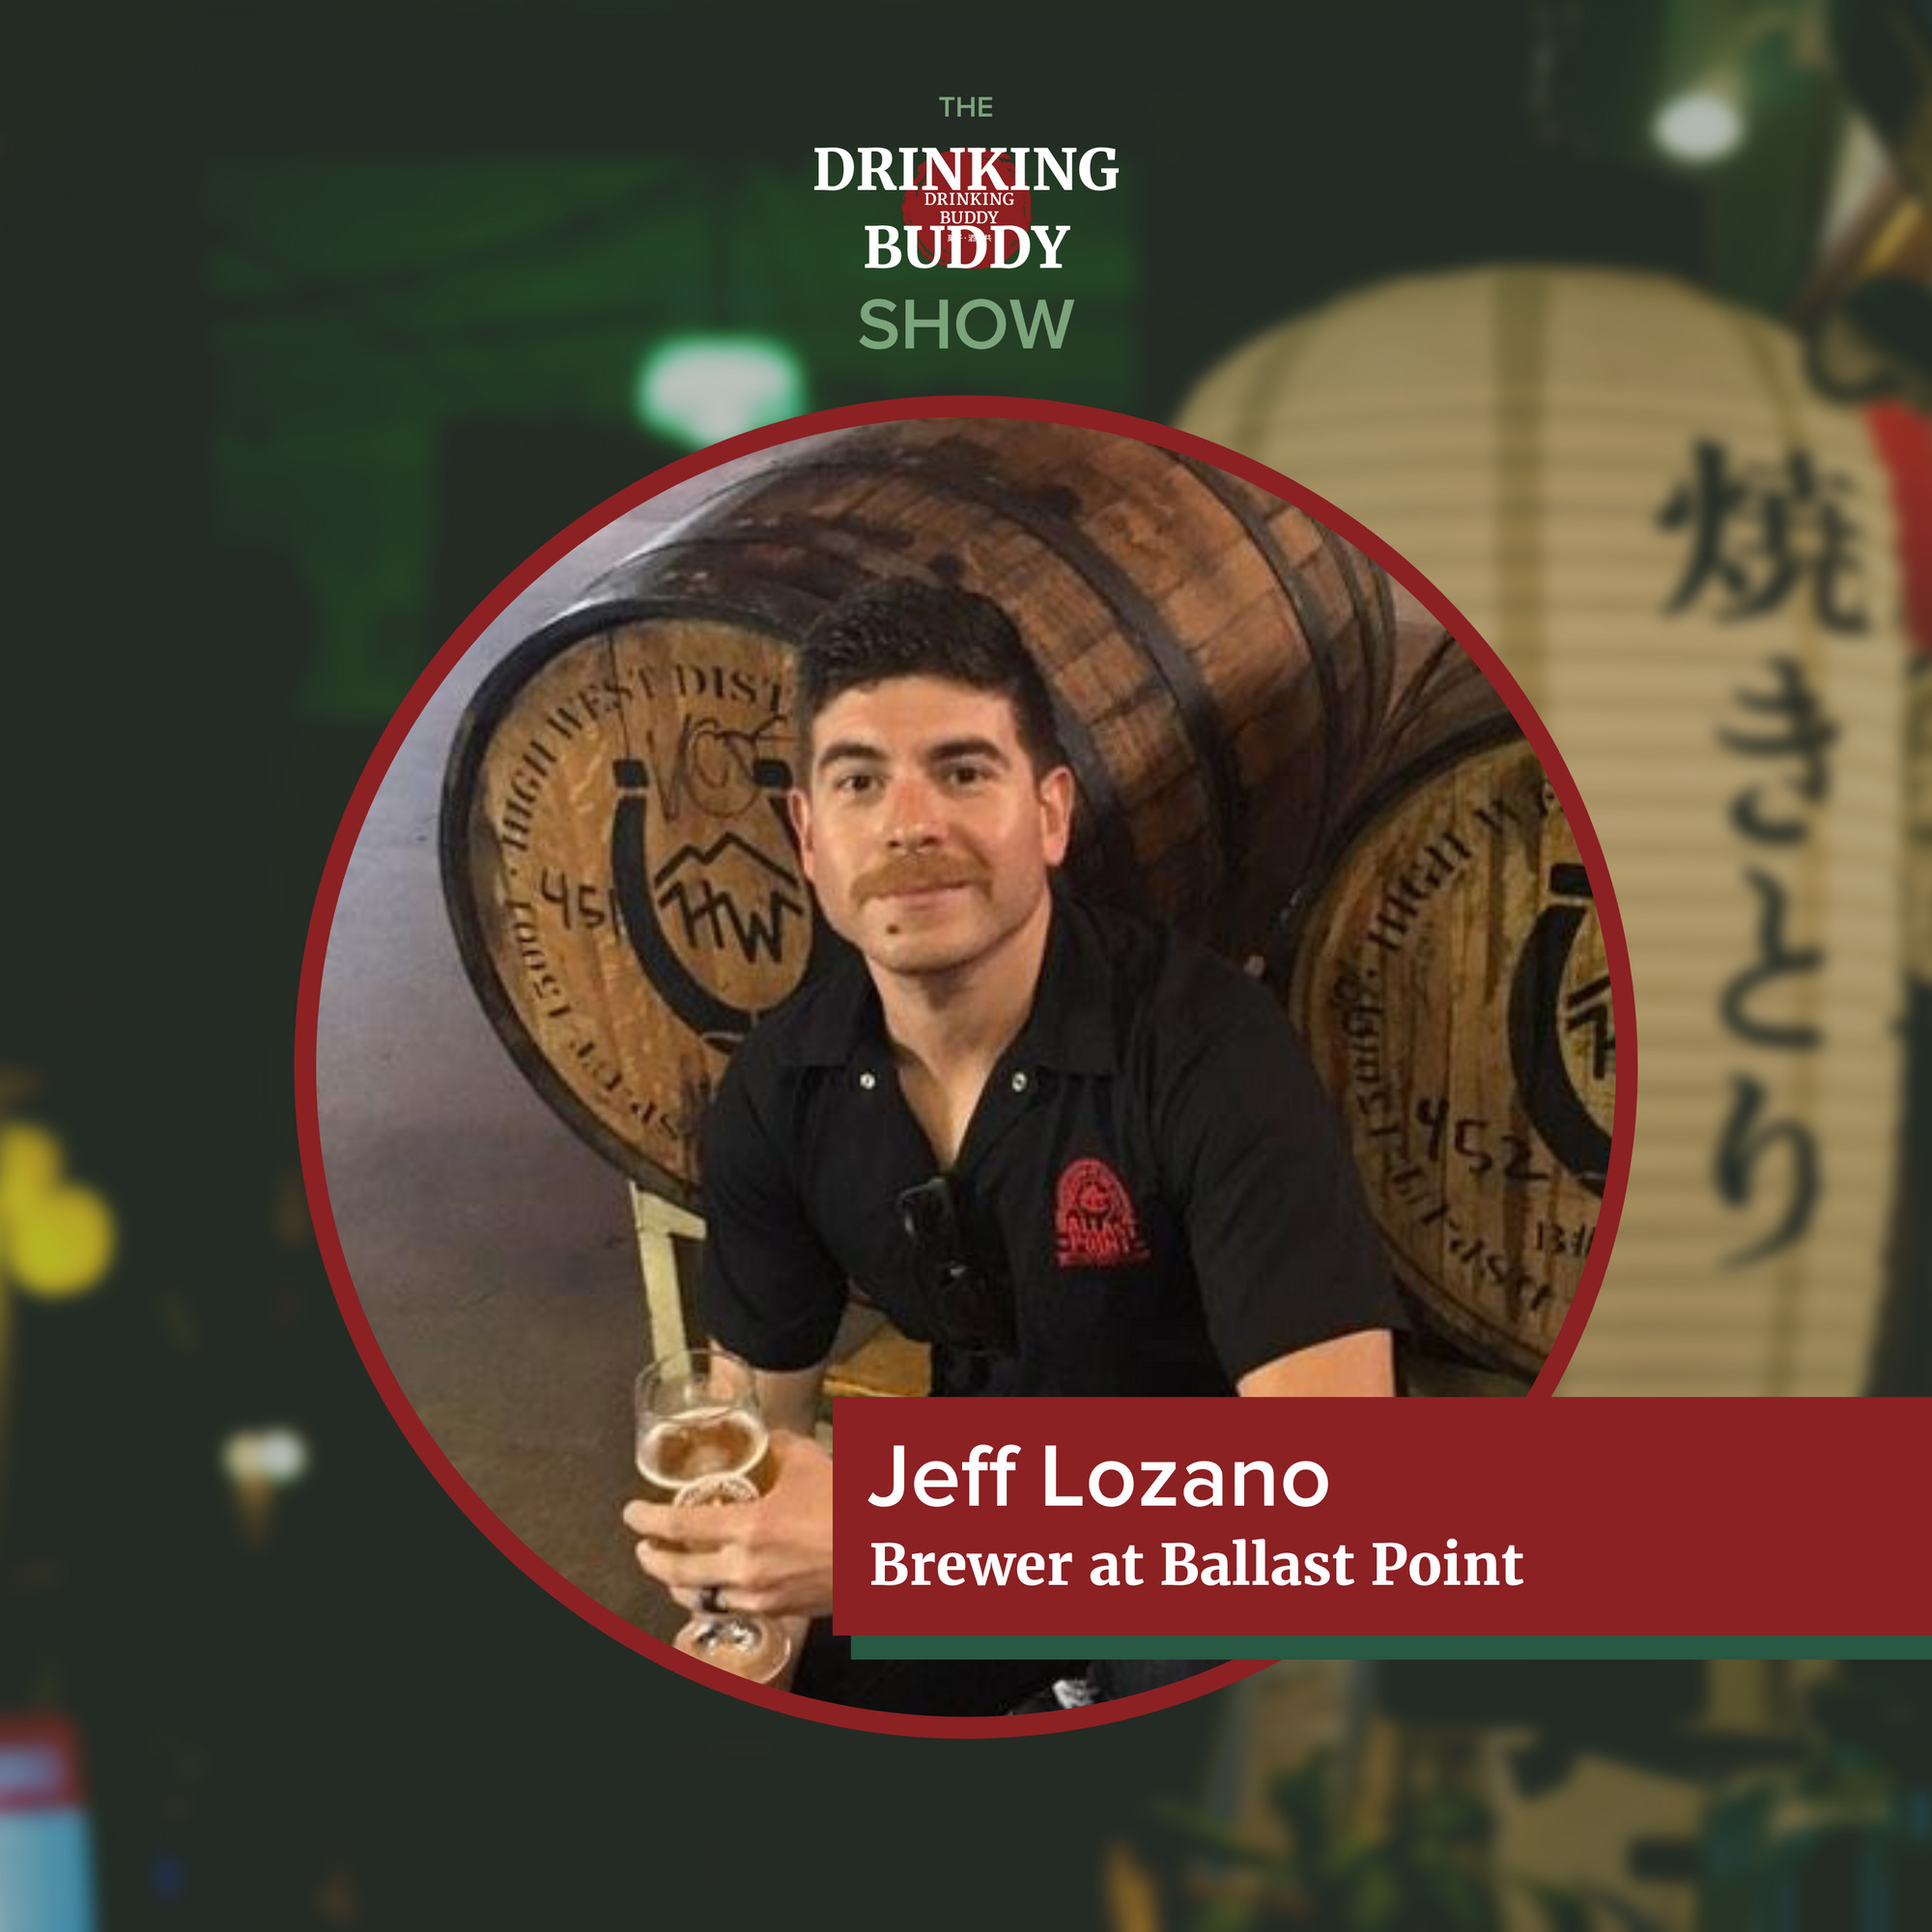 The Drinking Buddy Show Episode 8: Craft Beer Pairings & Music with Jeff Lozano, Brewer at Ballast Point Brewing Company